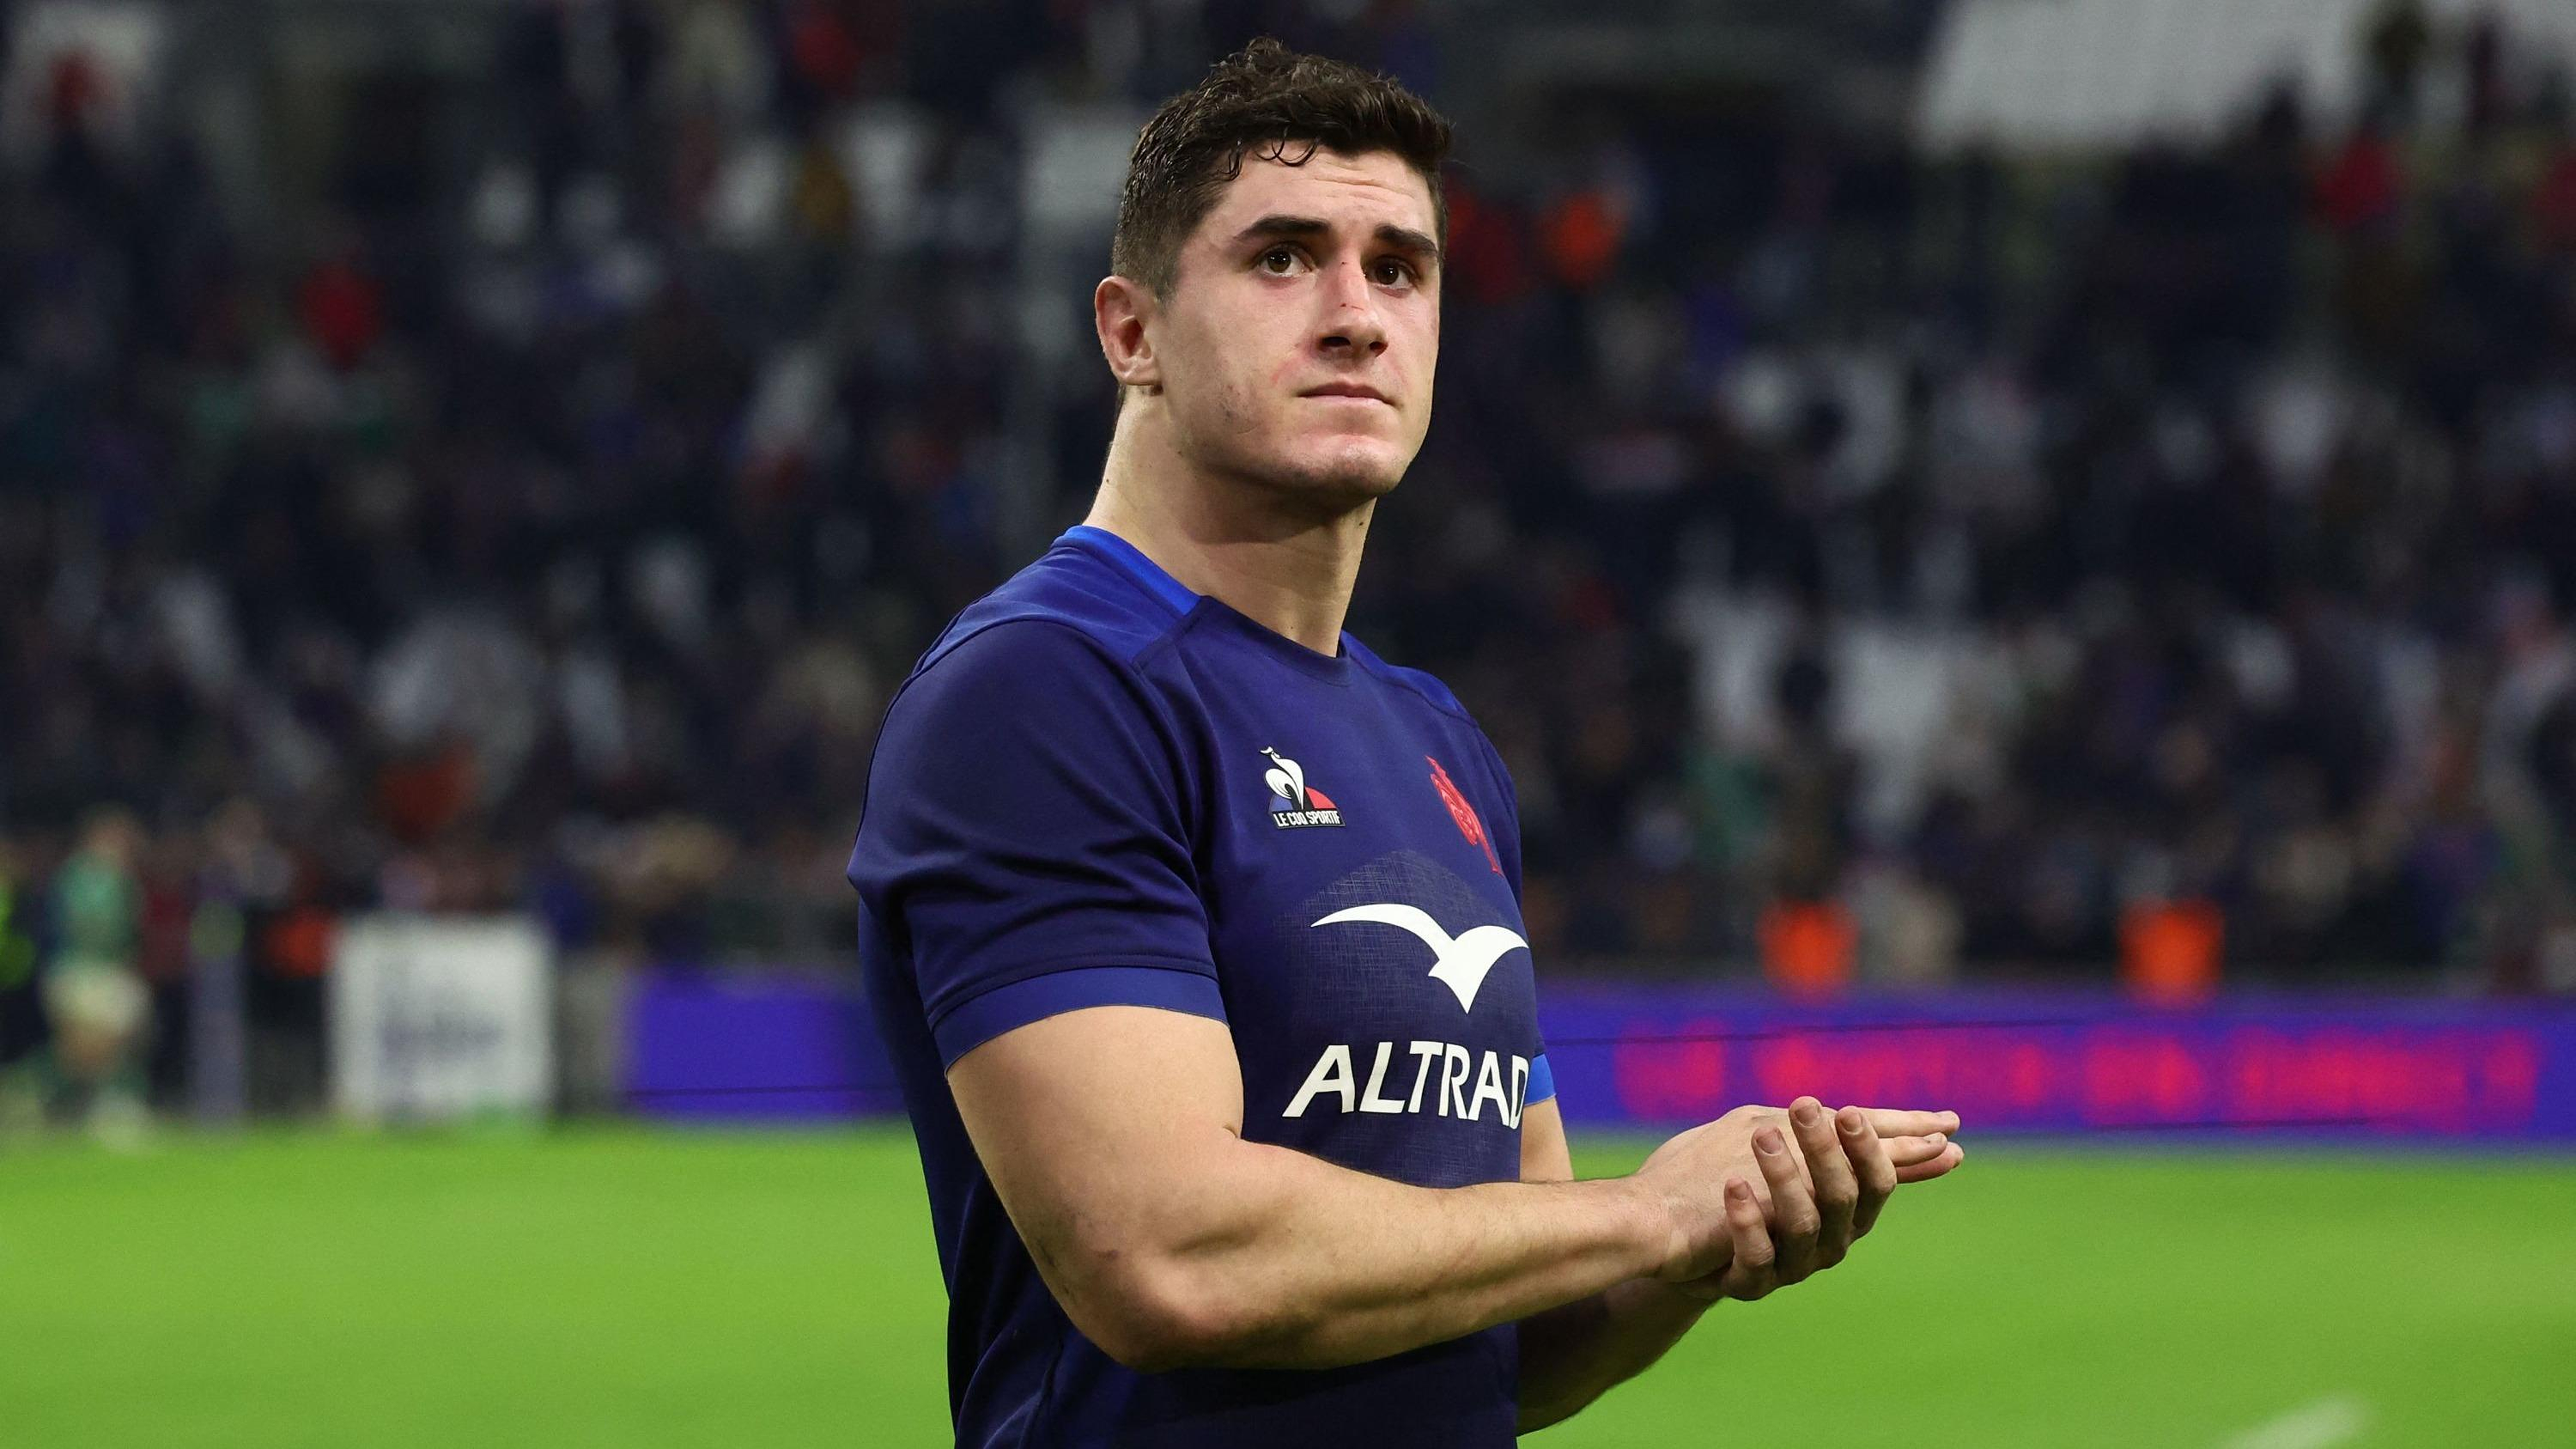 XV of France: “Morale and ego are affected” after the rout against Ireland, recognizes Boudehent